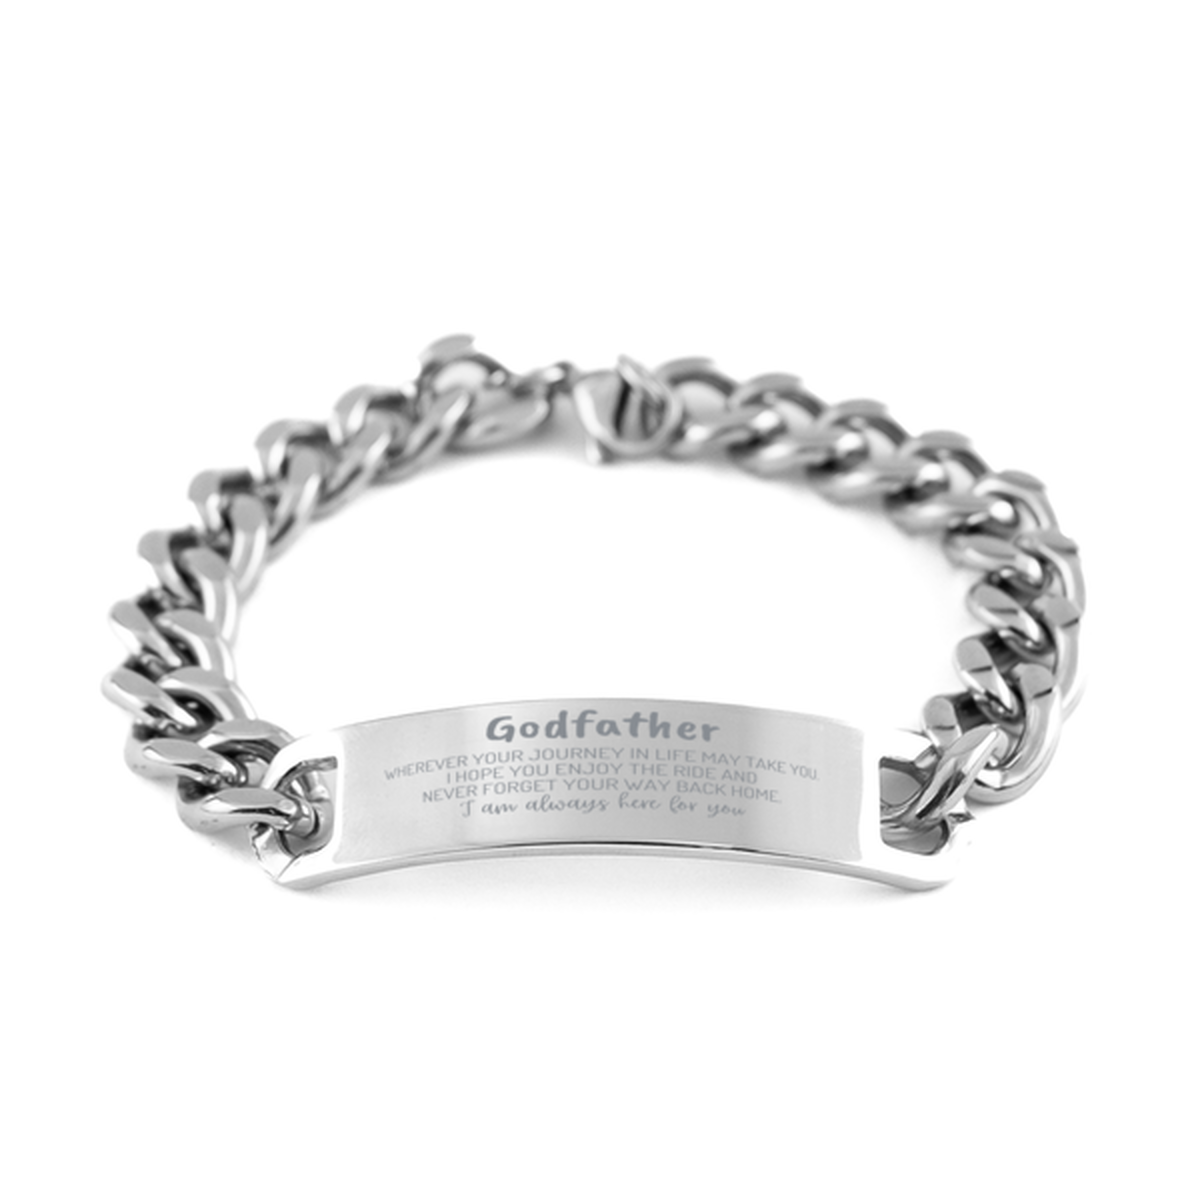 Godfather wherever your journey in life may take you, I am always here for you Godfather Cuban Chain Stainless Steel Bracelet, Awesome Christmas Gifts For Godfather, Godfather Birthday Gifts for Men Women Family Loved One